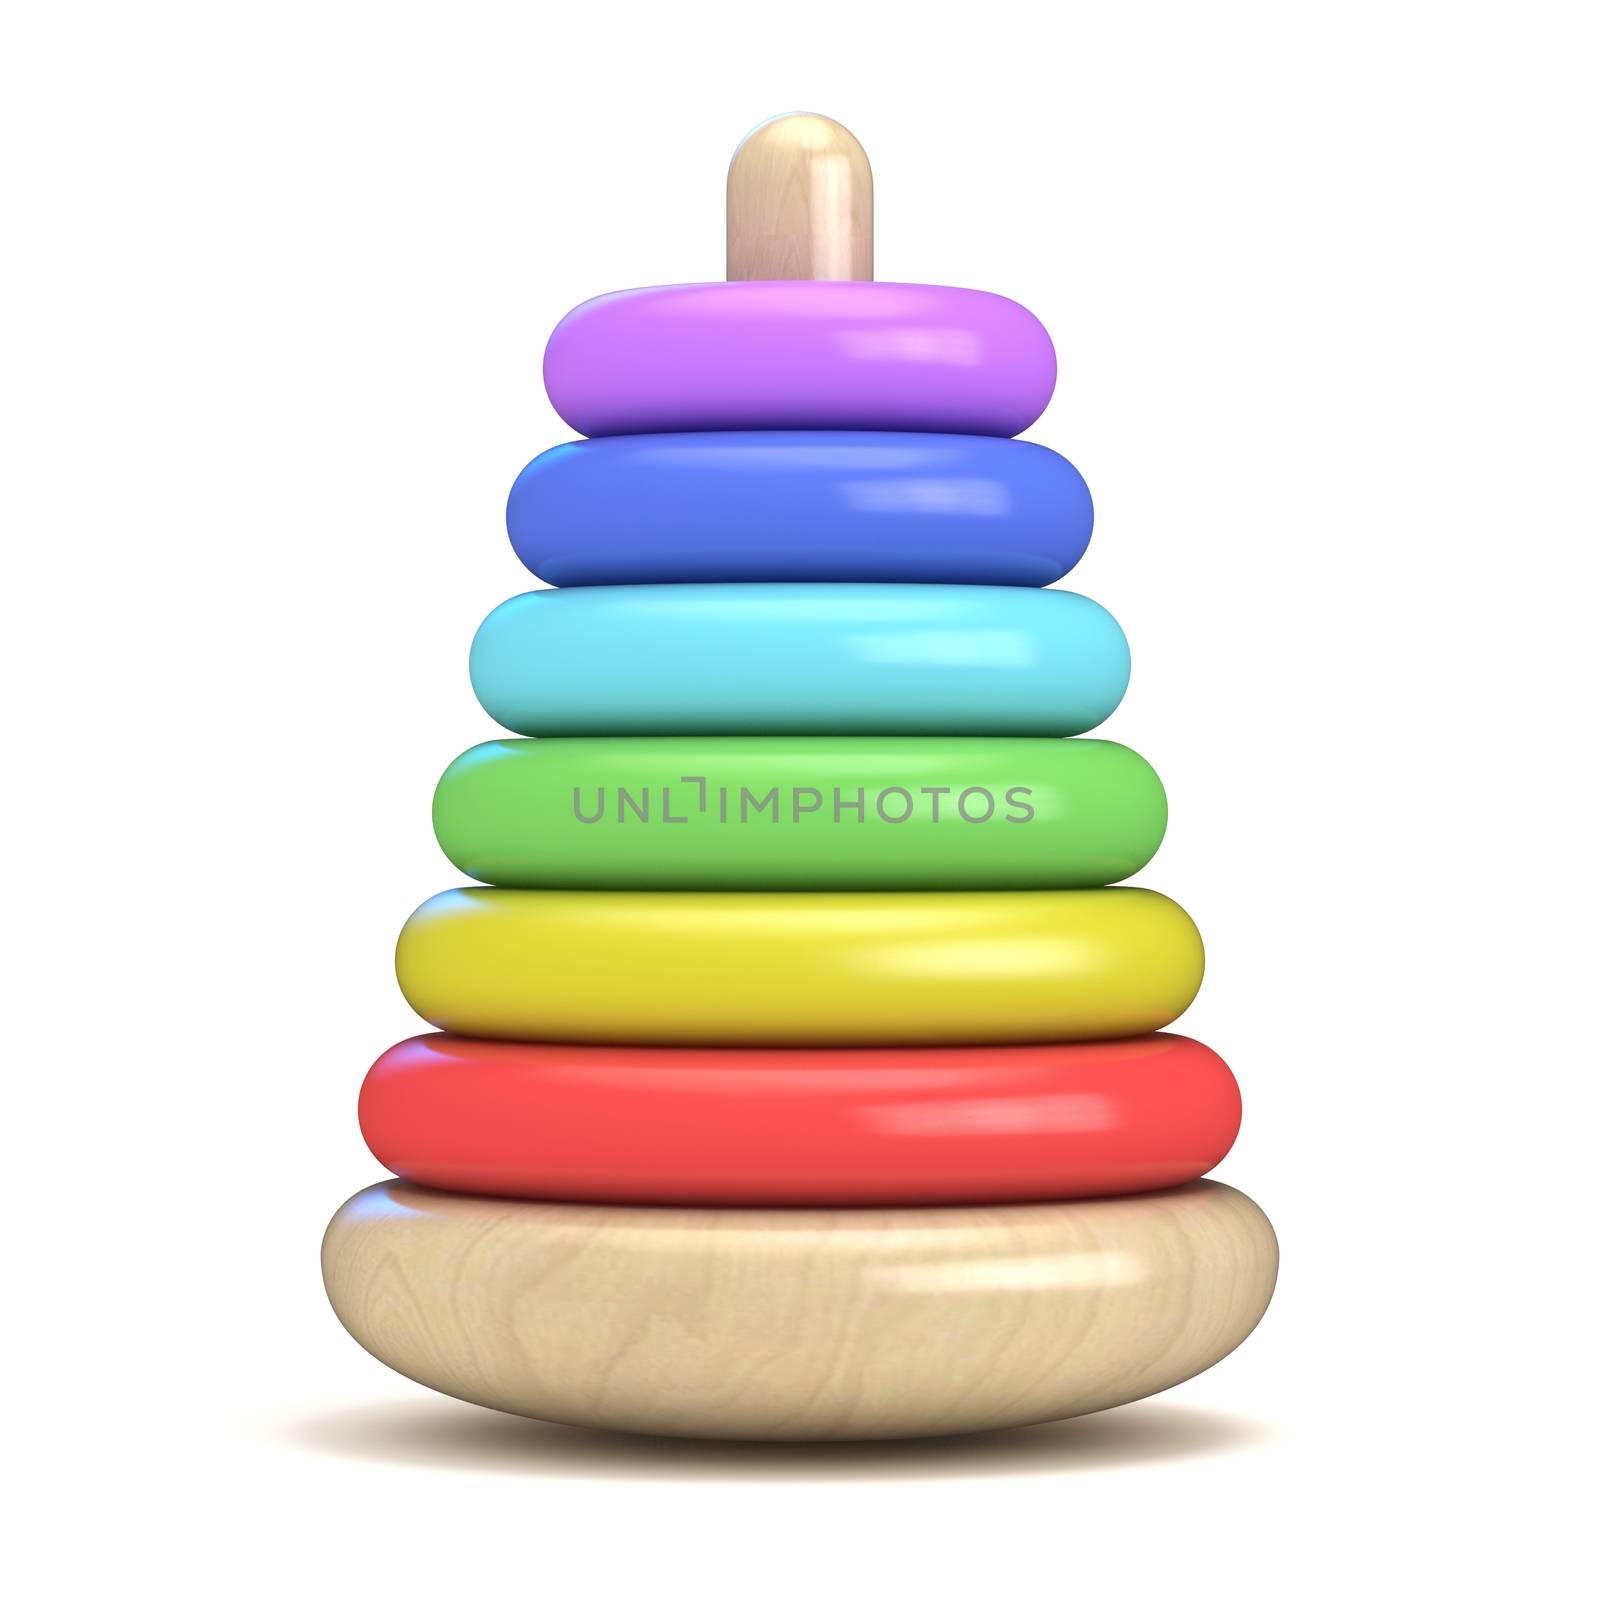 Pyramid build from colored wooden rings. Colorful wooden toy. 3D by djmilic